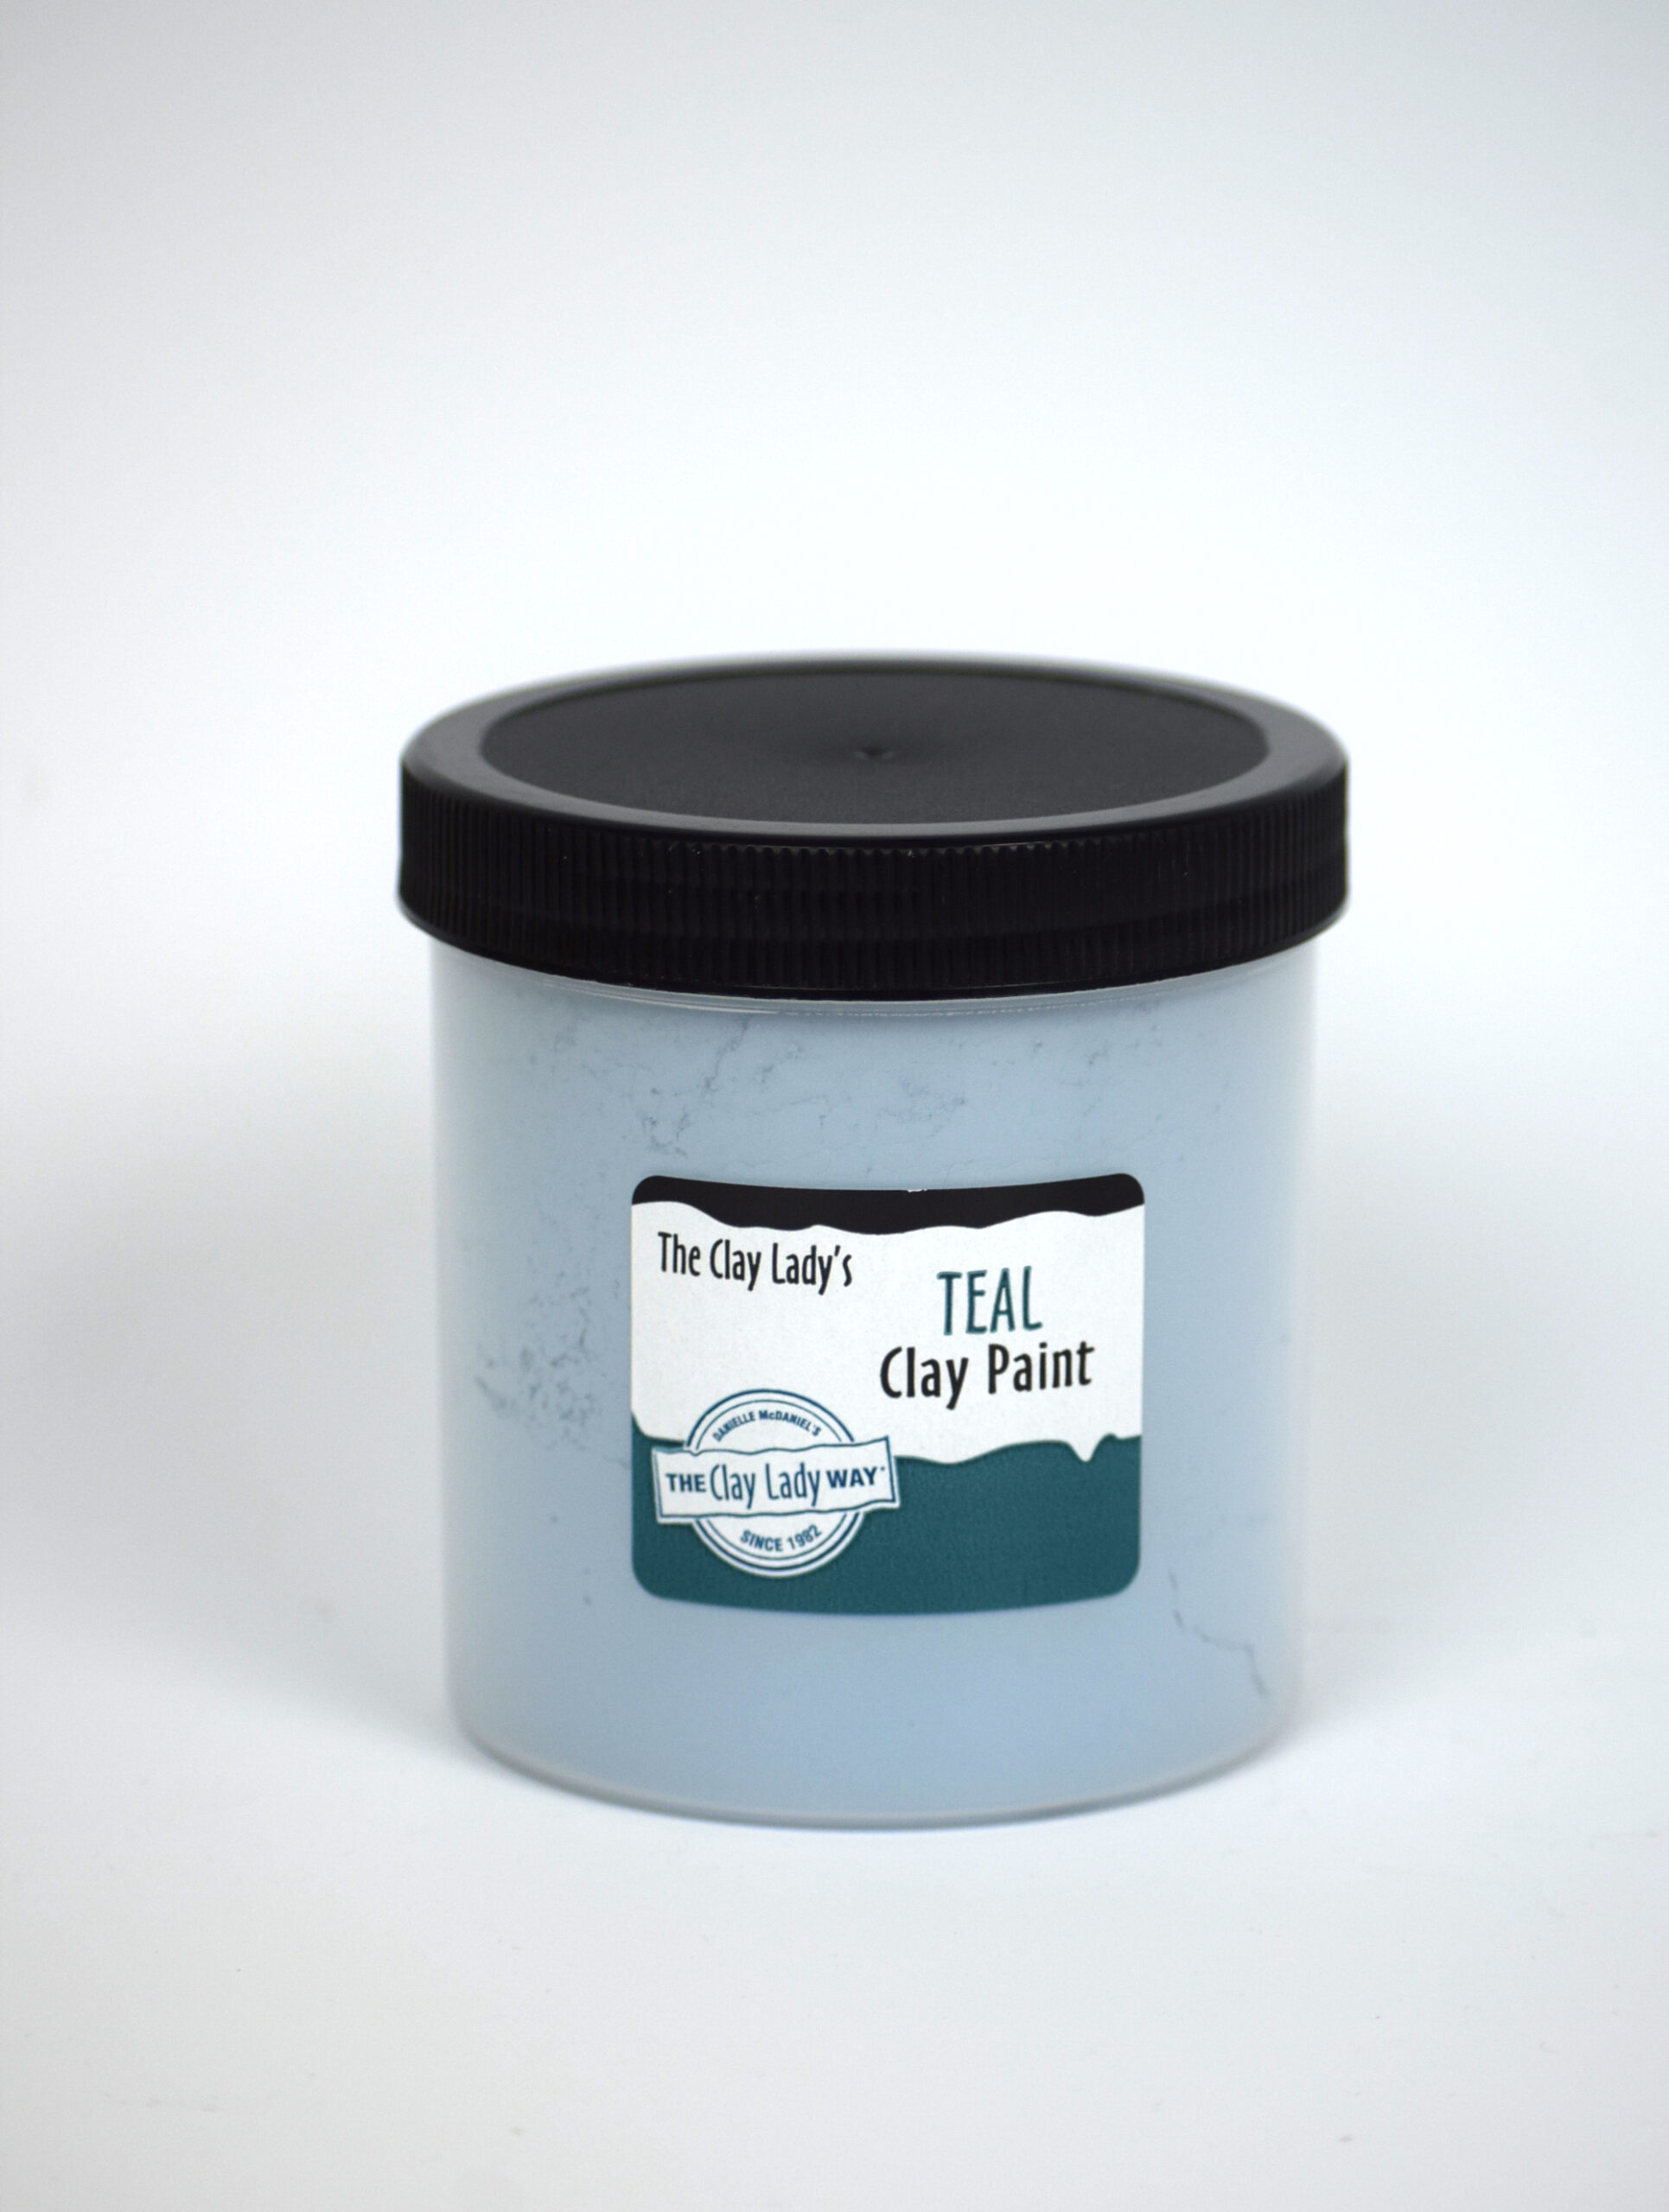 The Clay Lady's Teal Clay Paint - Mid-South Ceramics